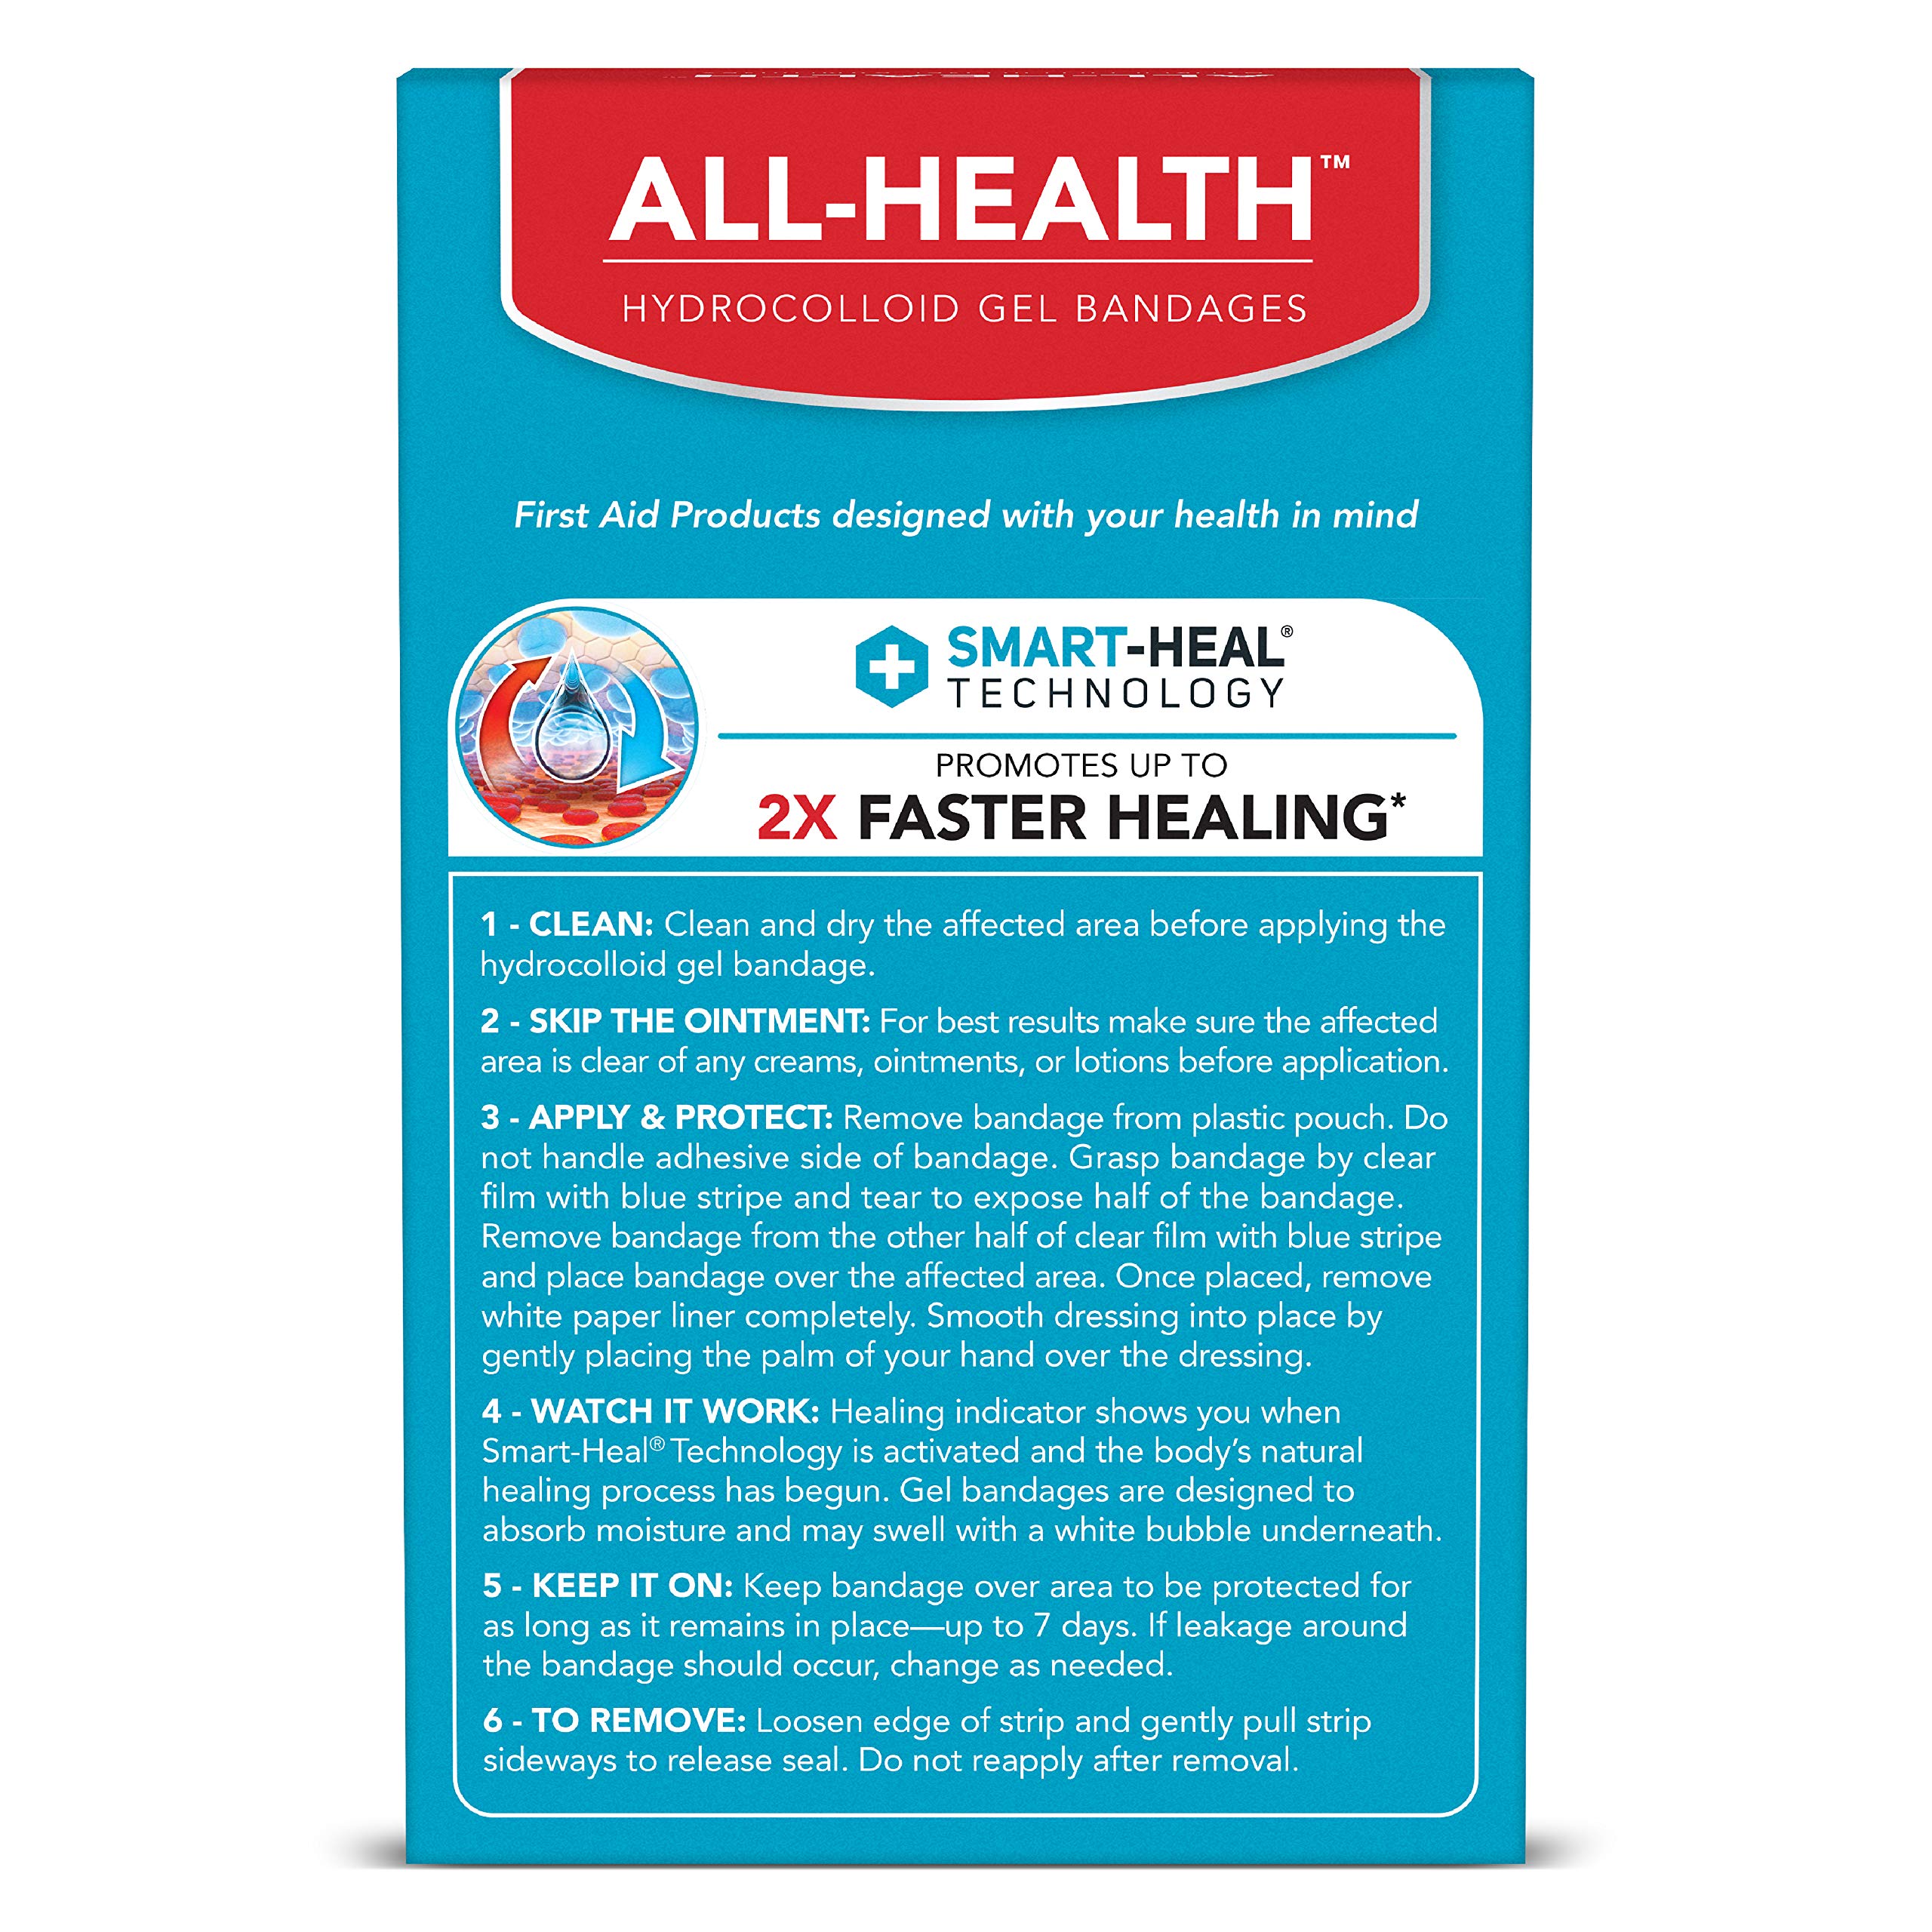 All Health Advanced Fast Healing Hydrocolloid Gel Bandages, Regular 20 ct | 2X Faster Healing for First Aid Blisters or Wound Care, 20 Count